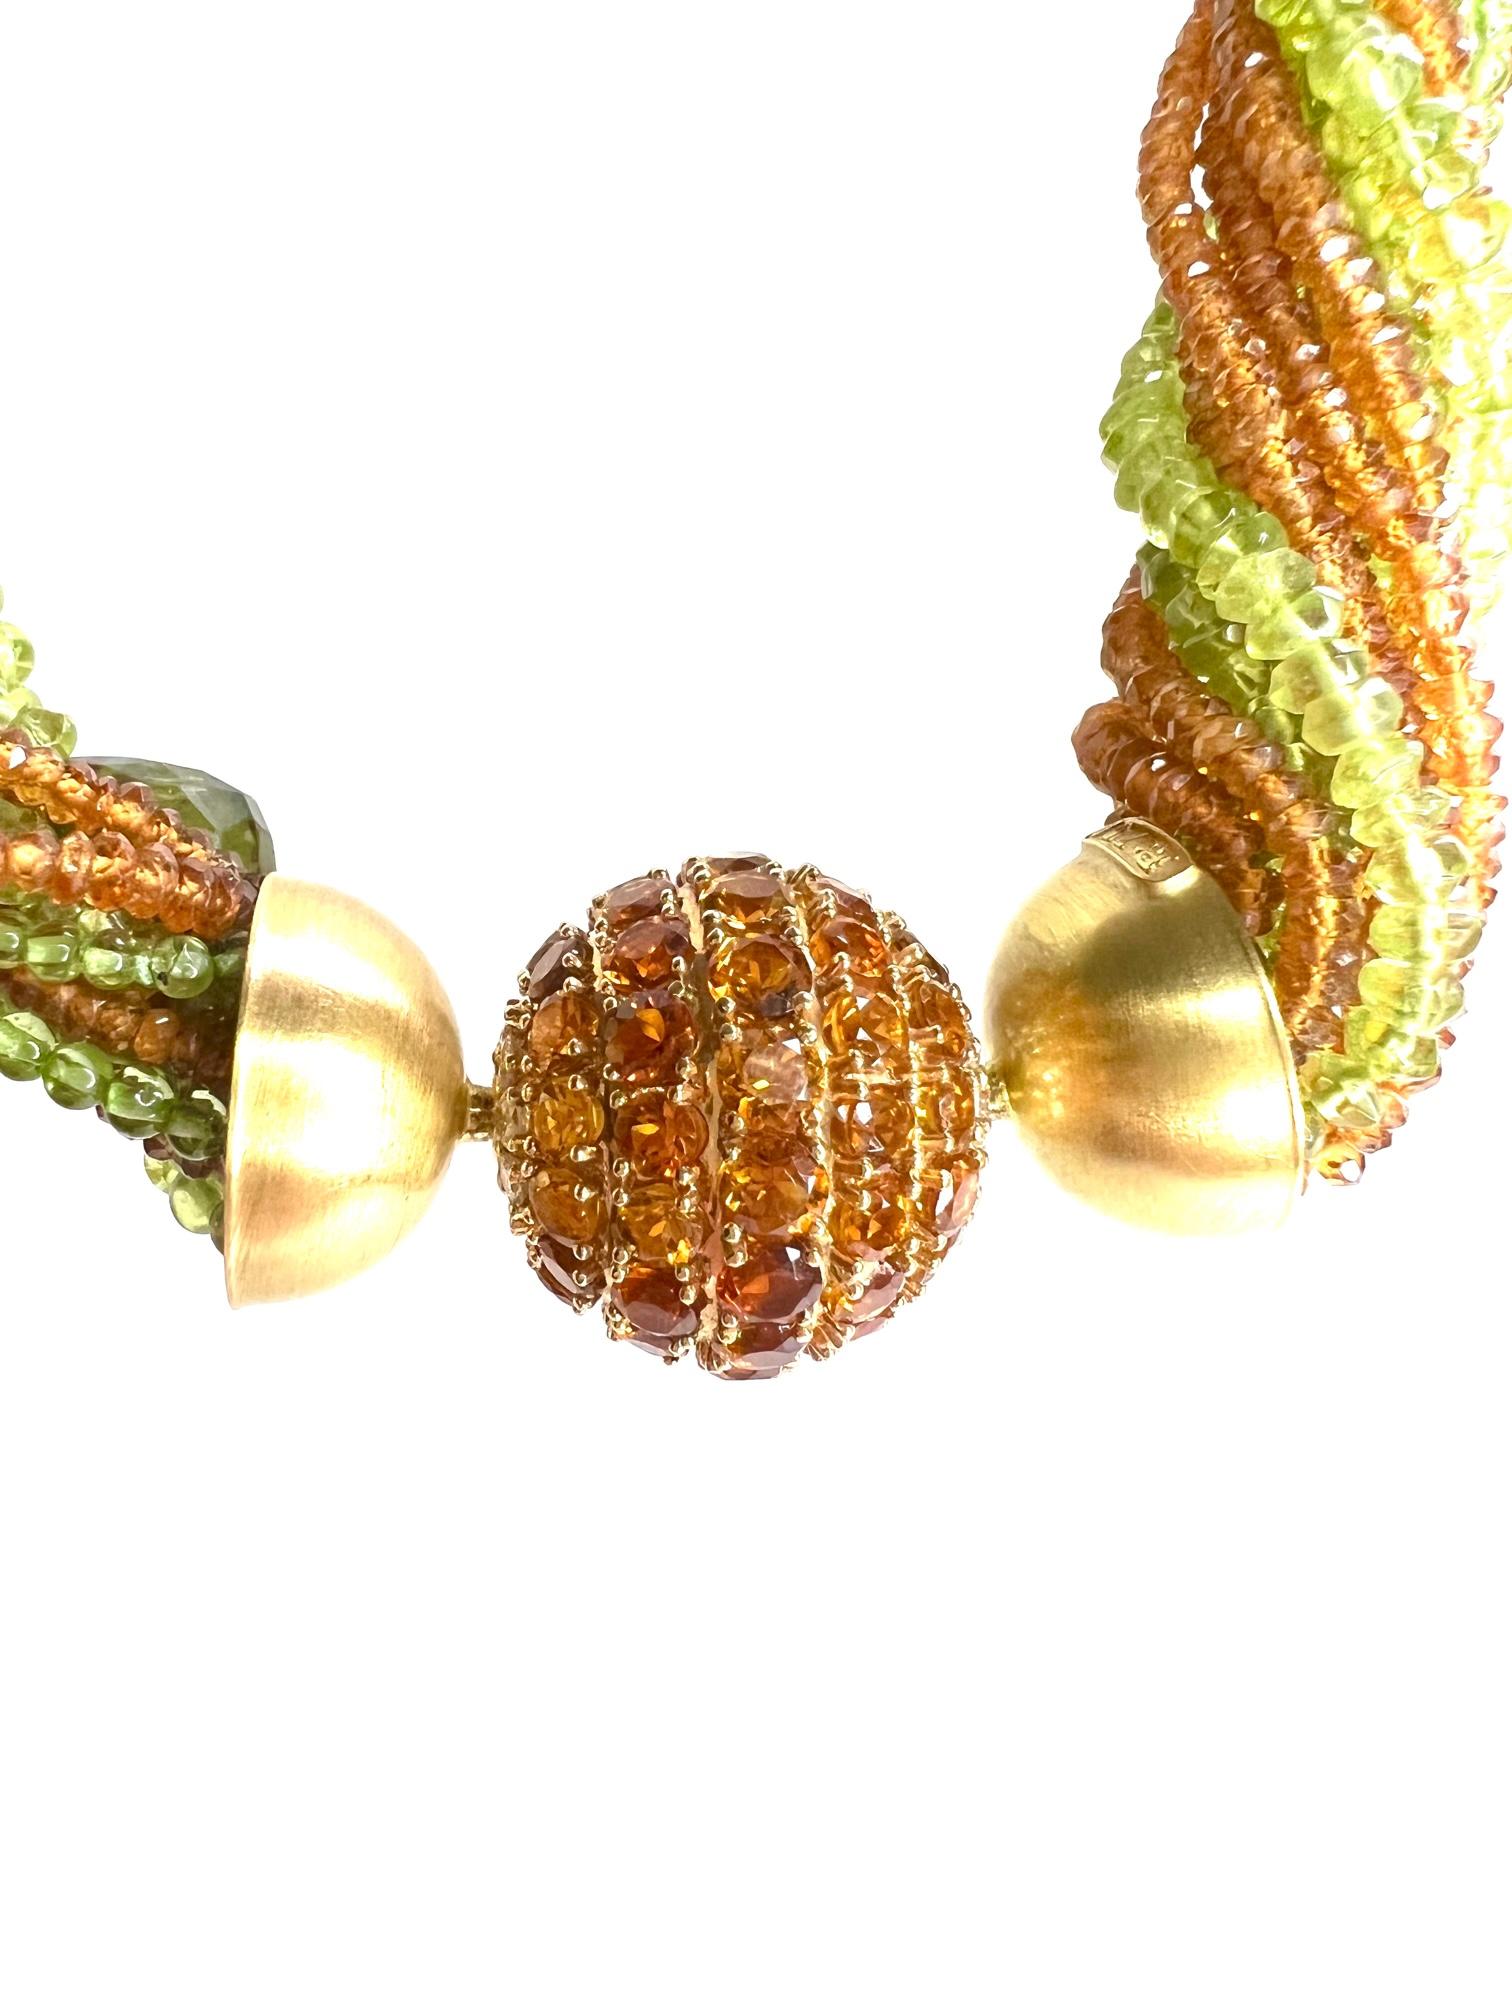 Thomas Leyser is renowned for his contemporary jewellery designs utilizing fine gemstones.

1 necklace with 18k Rose Gold Endings and with 16 facetted Peridot and Citrine ropes.

This necklace can be used with a clasp. This is described also at